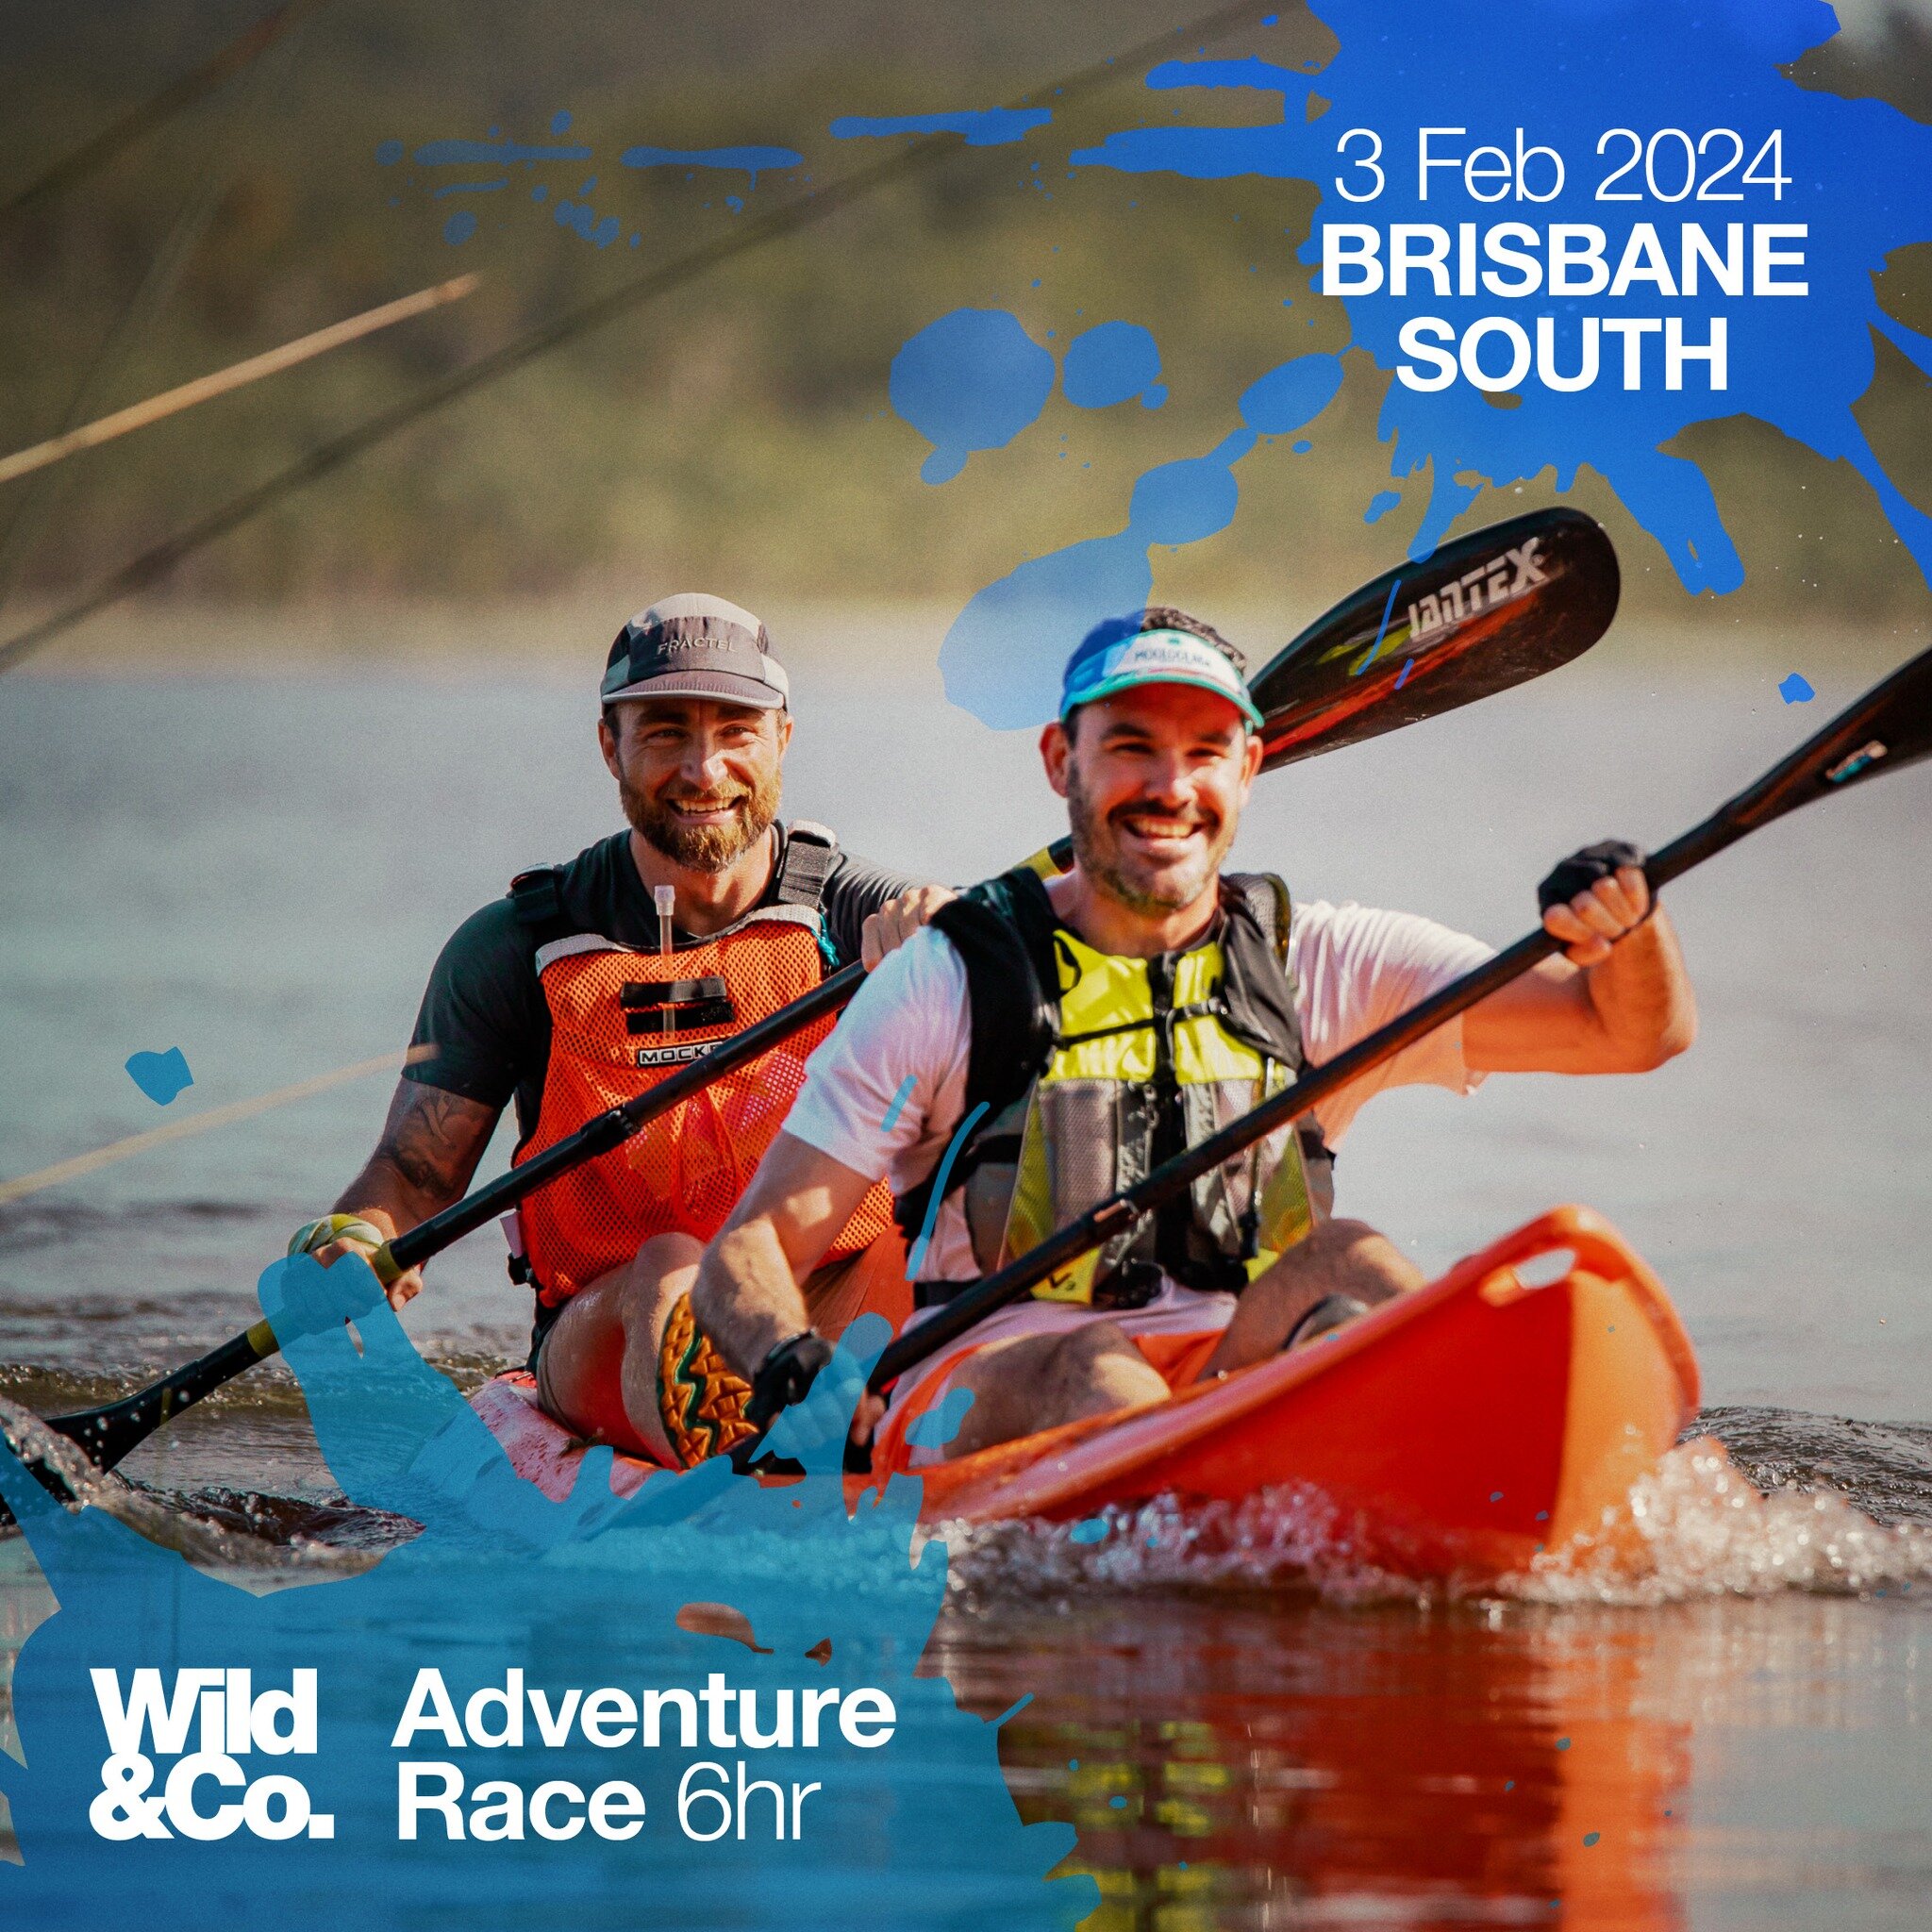 Brisbane Canberra and Ulladulla 6hr Events Up Next!

Brisbane South &ndash; 3rd February &ndash; The awesomeness starts with our Brisbane South event which will be based out of the park along the esplanade at Lota just south of Manly. The walking and